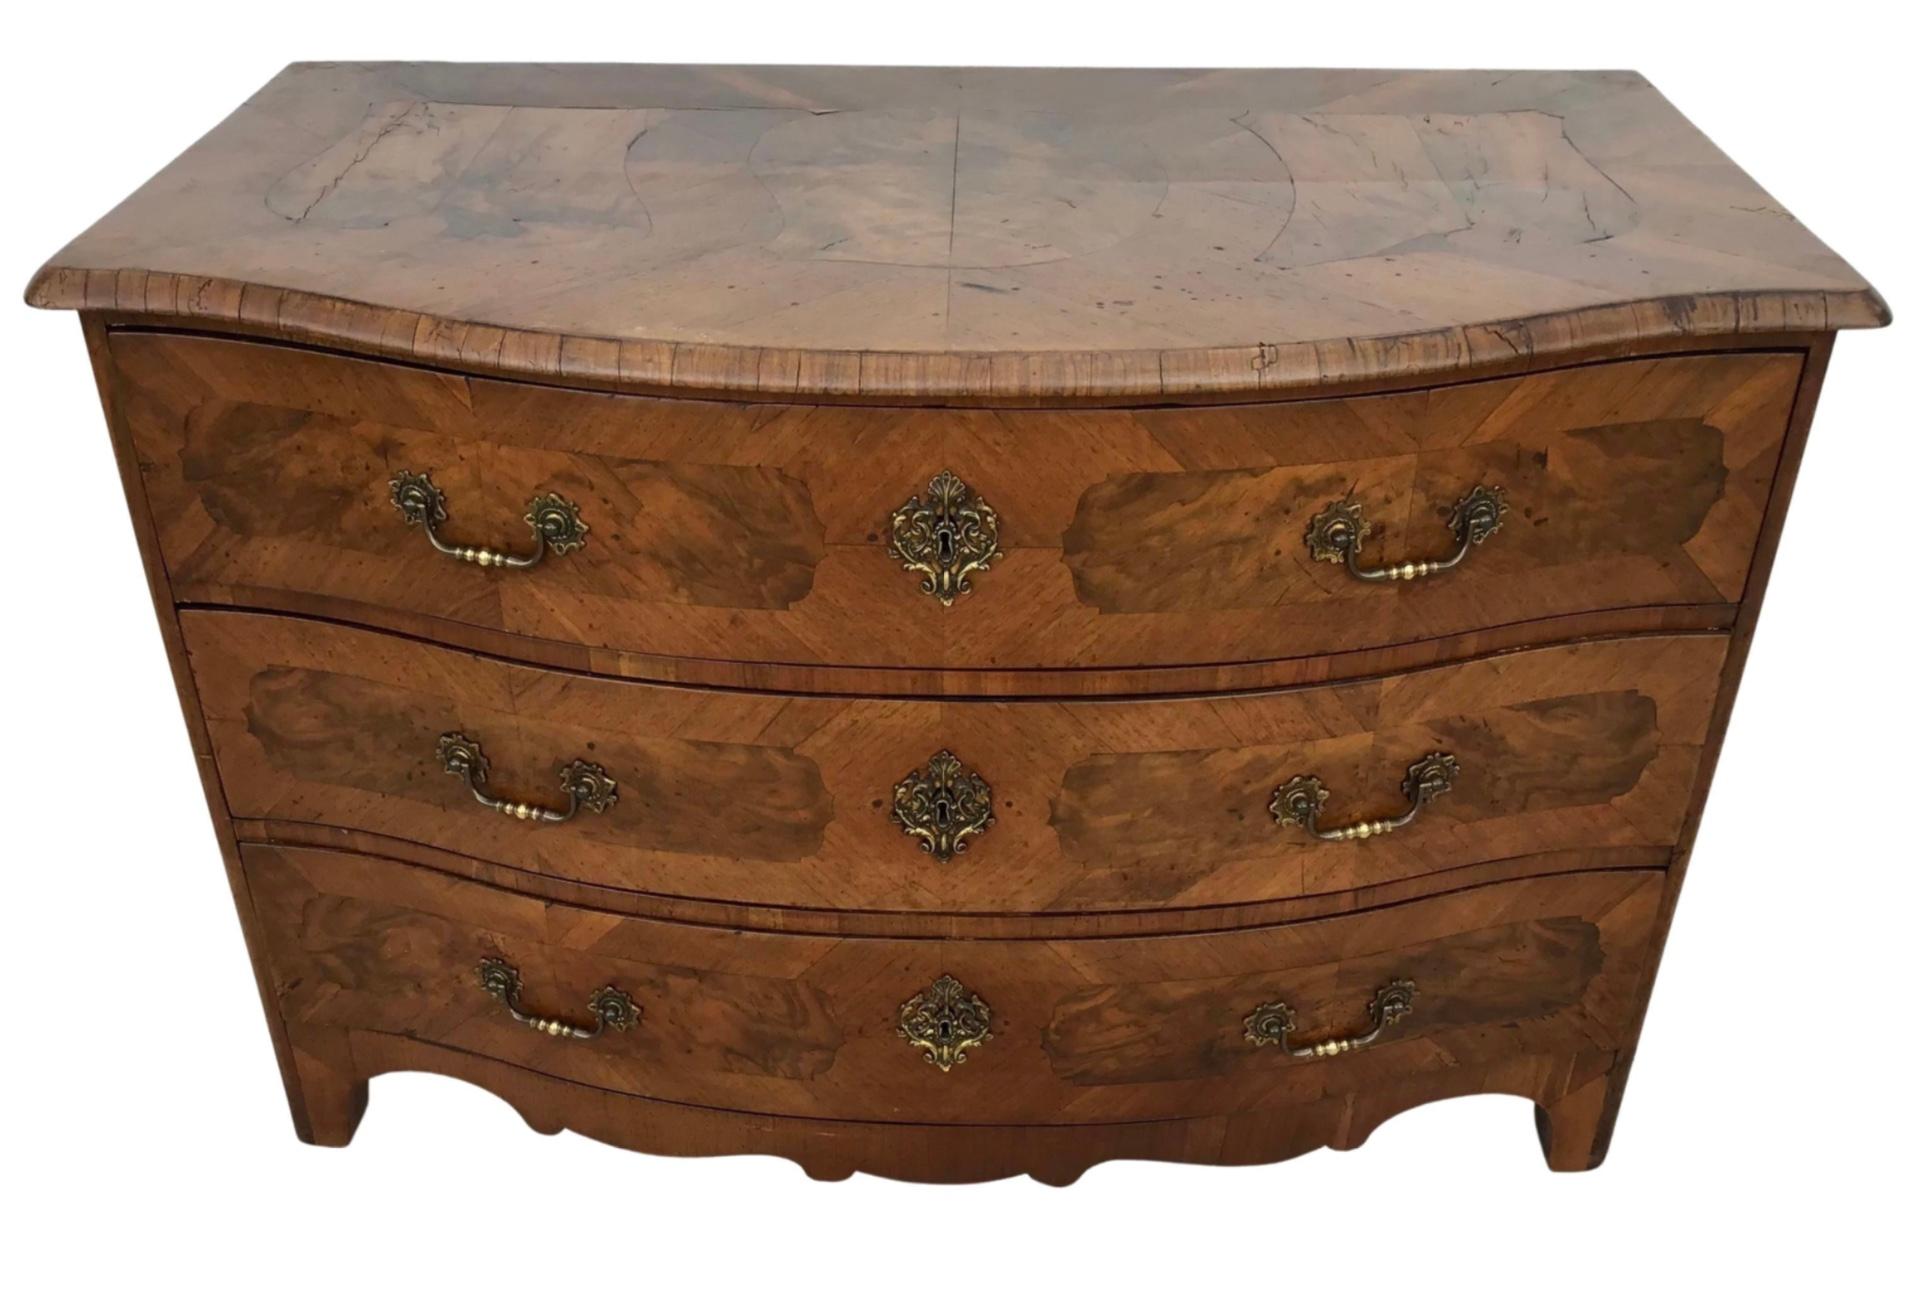 18th Century German Baroque Chest of Drawers - Commode In Good Condition For Sale In Bradenton, FL